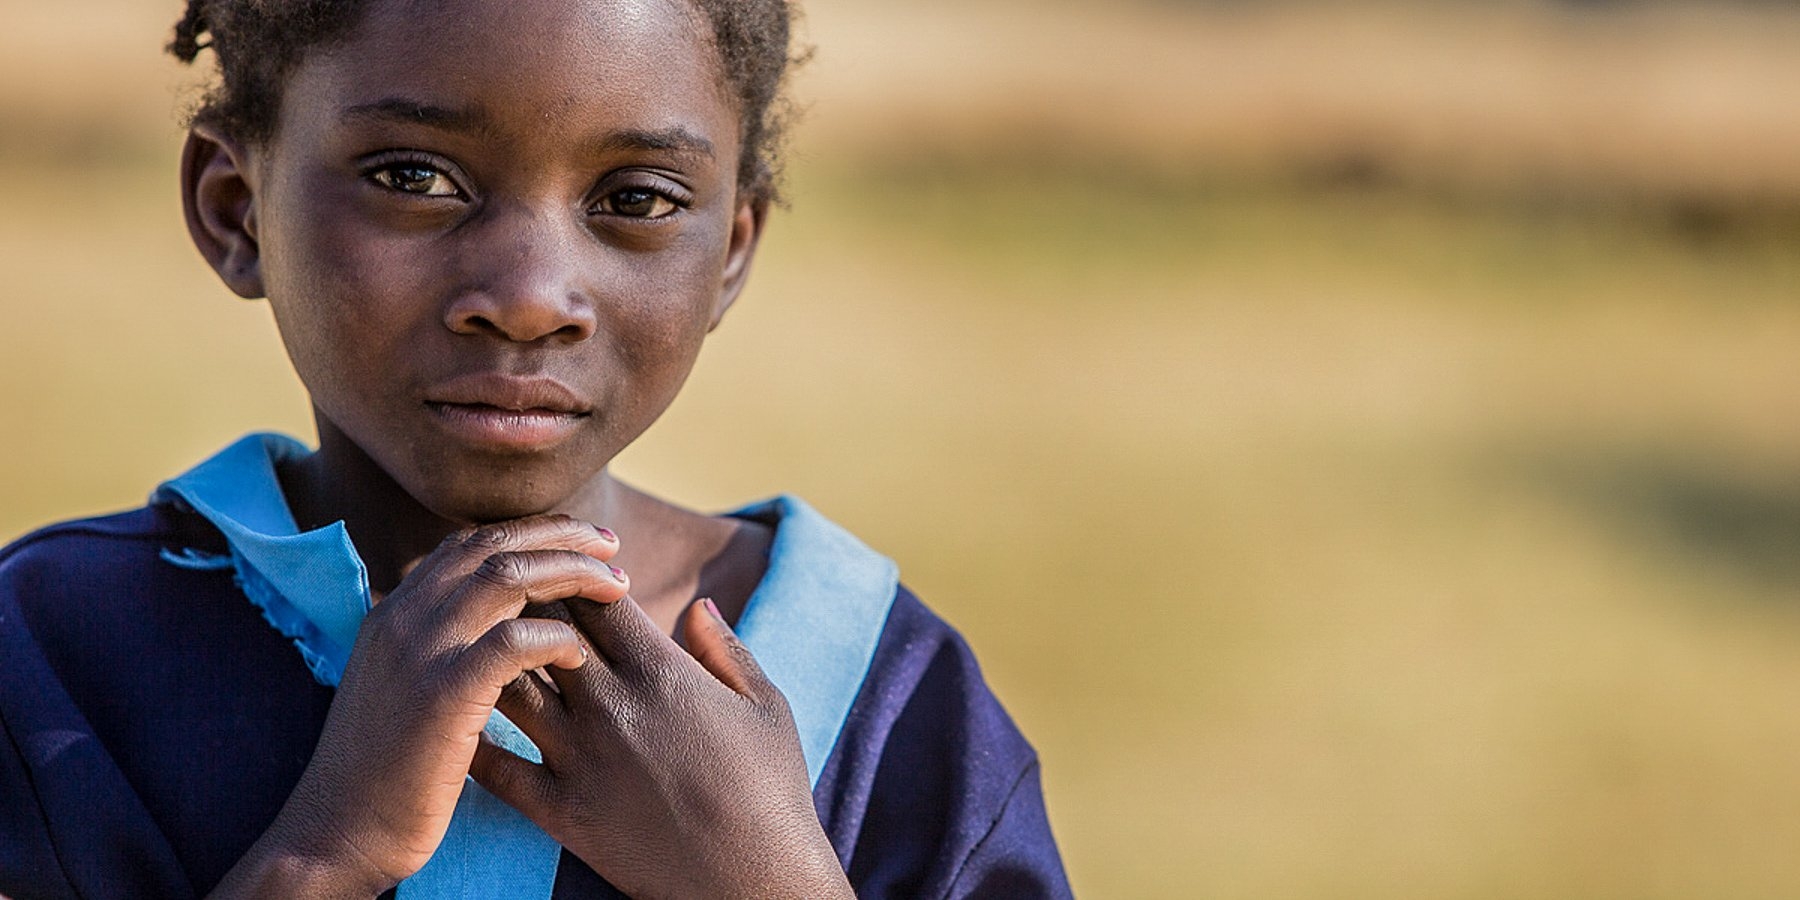 This little girl in Zambia is in the second grade and is enrolled in a school supported by Save the Children.